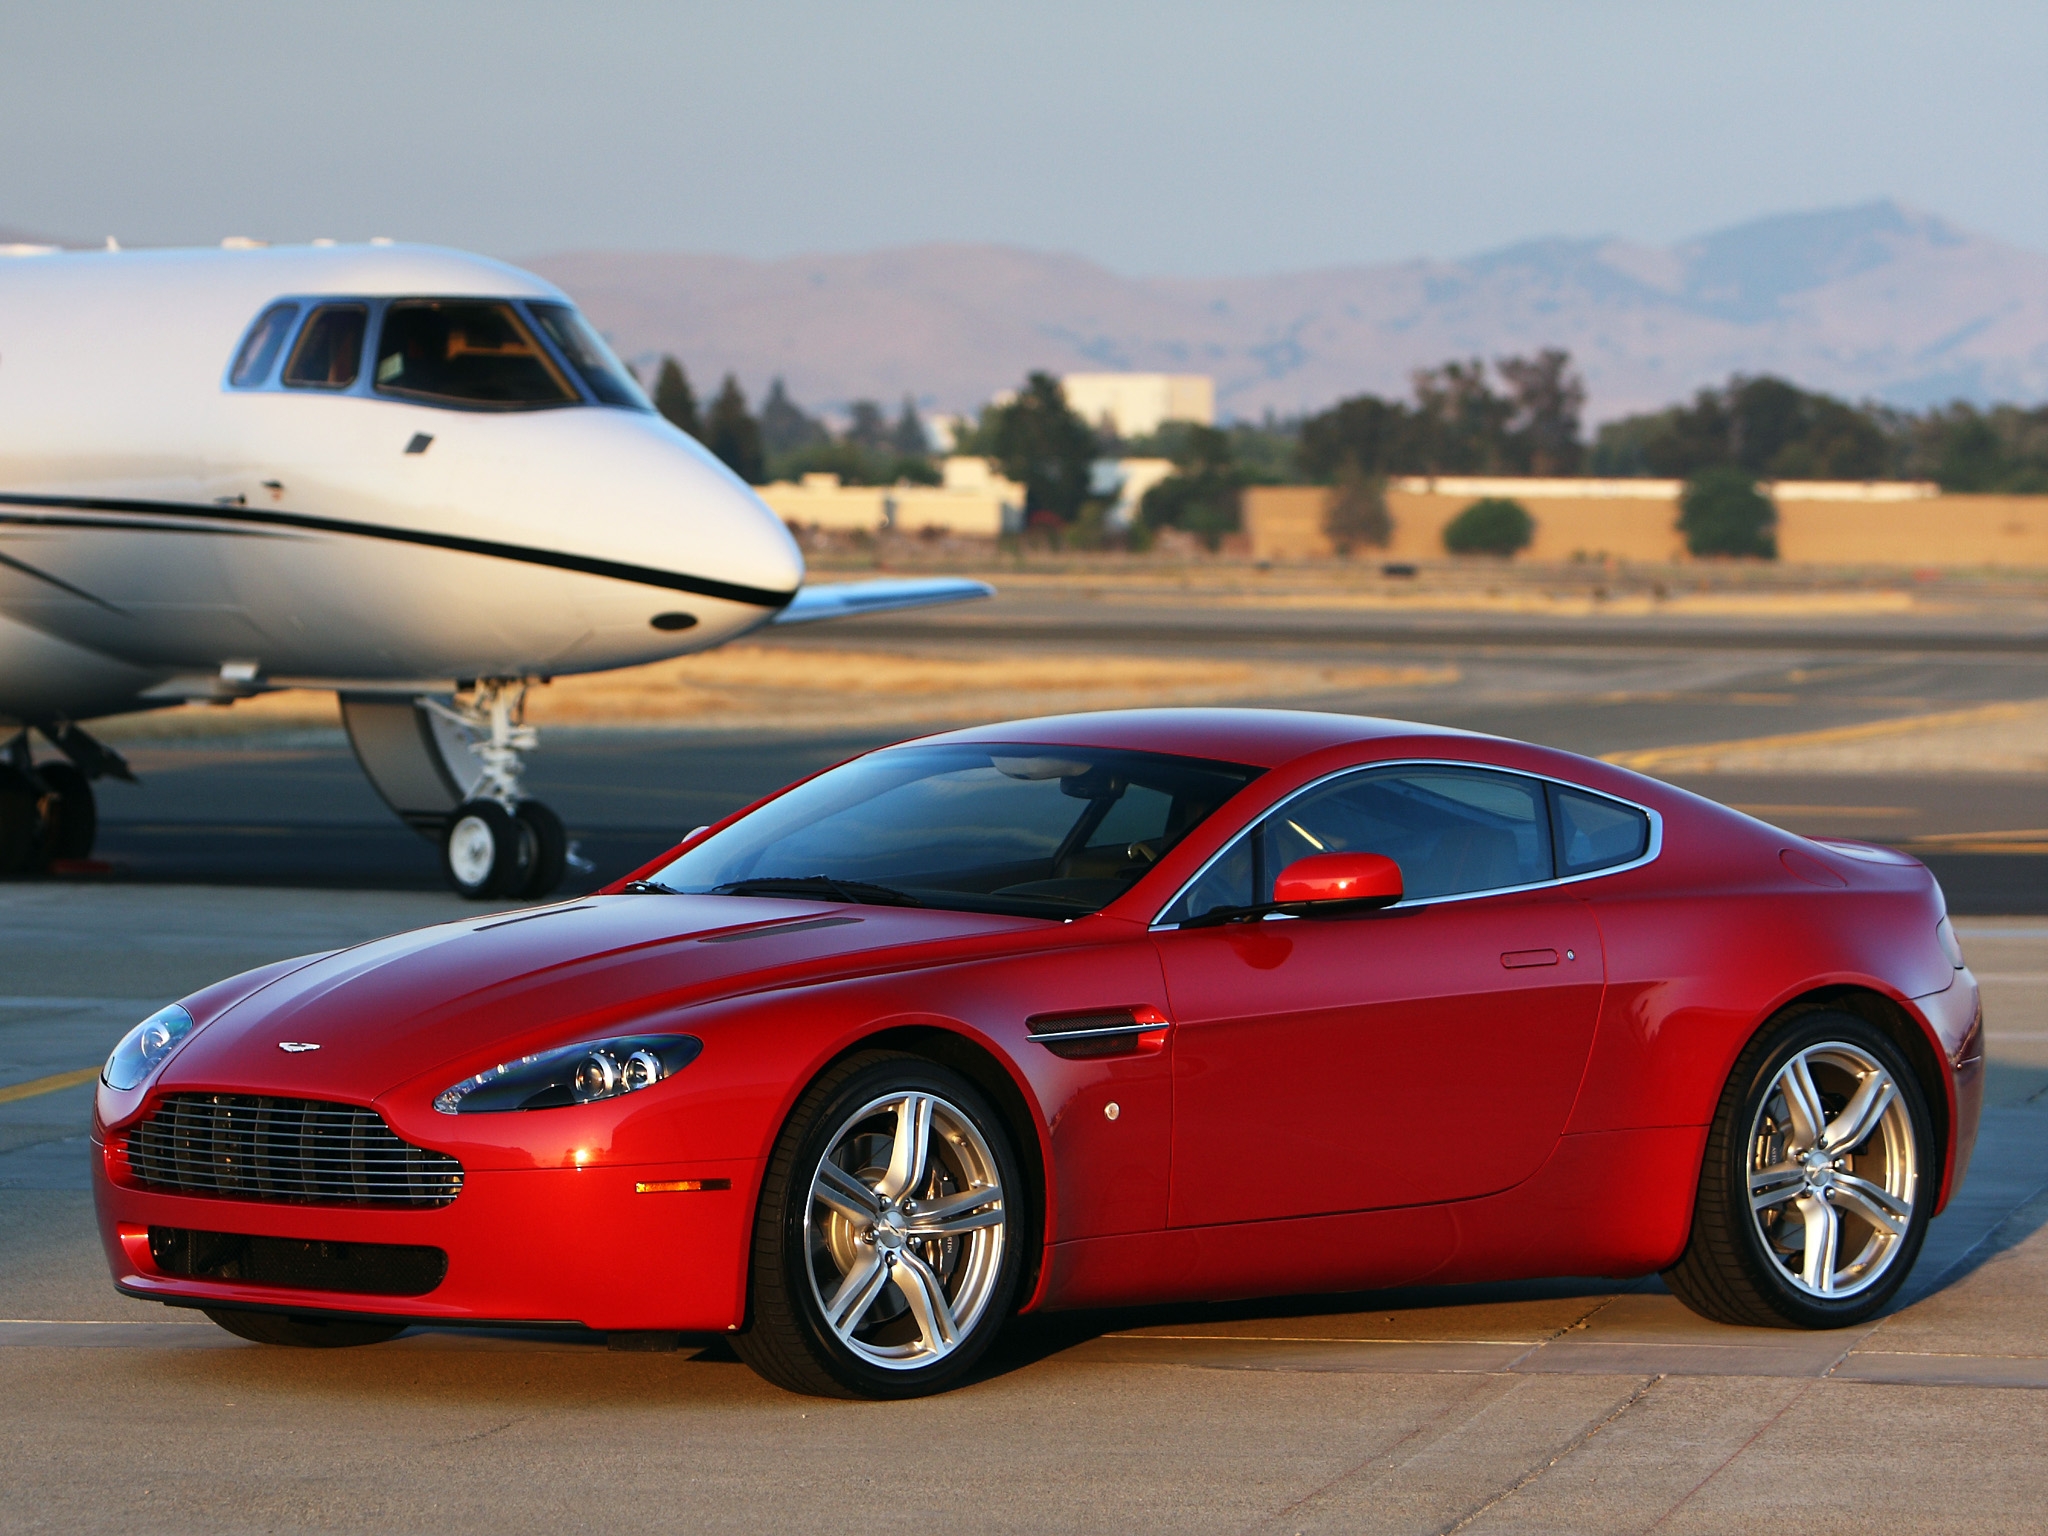 aston martin, vantage, v8, cars, red, side view, plane, airplane, style, 2008